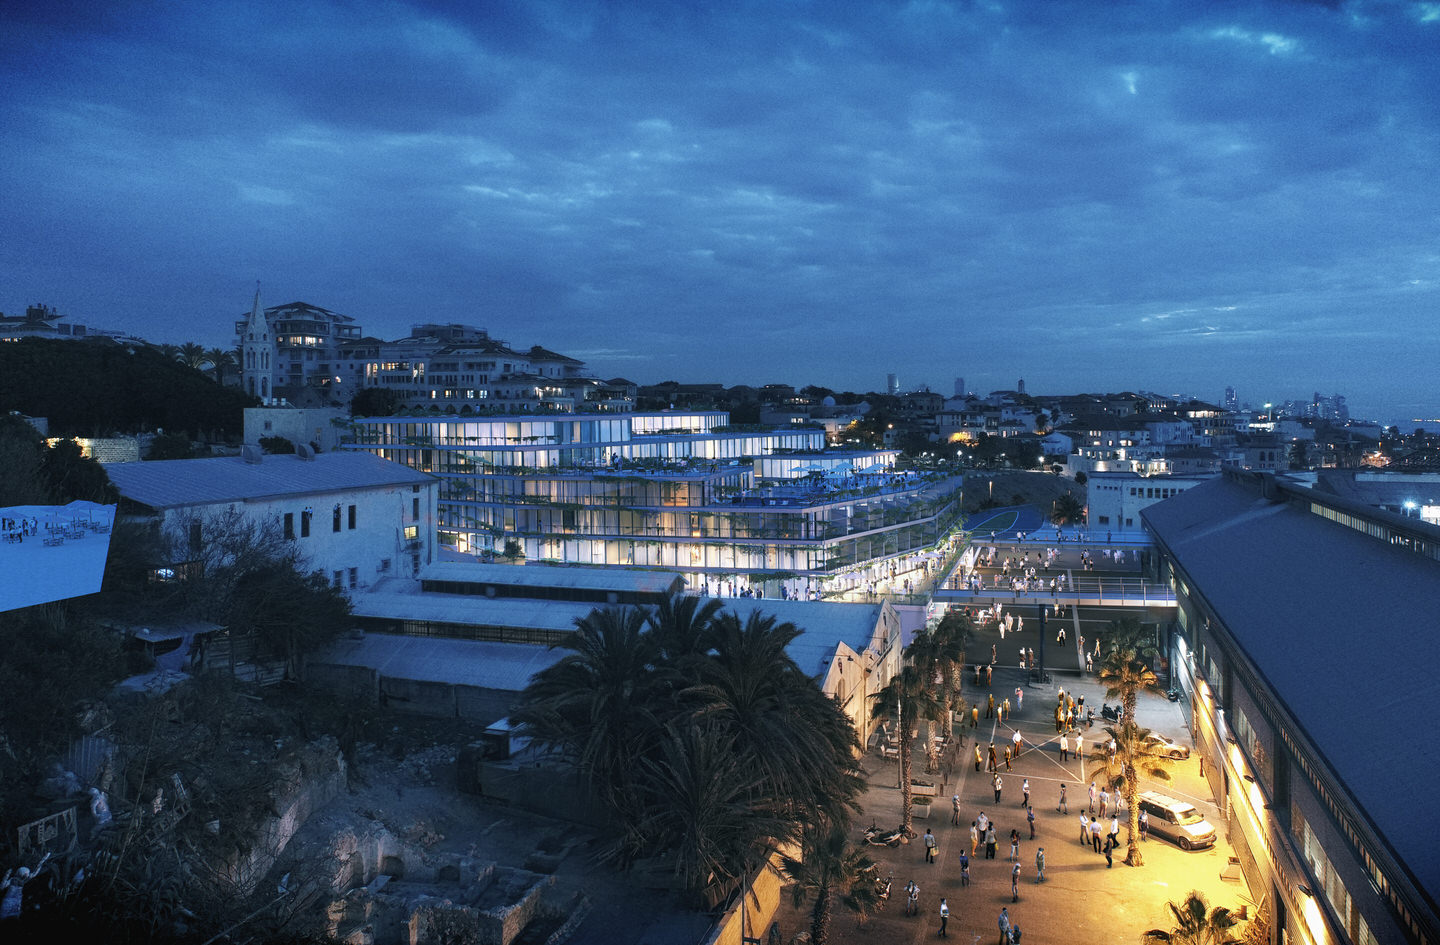 Lamina: A nighttime preview of the new mixed-use development at Jaffa Port, blending residential, commercial, and hotel spaces into the historic cityscape | Reality the Leading Group of Real Estate Investment Funds in Israel